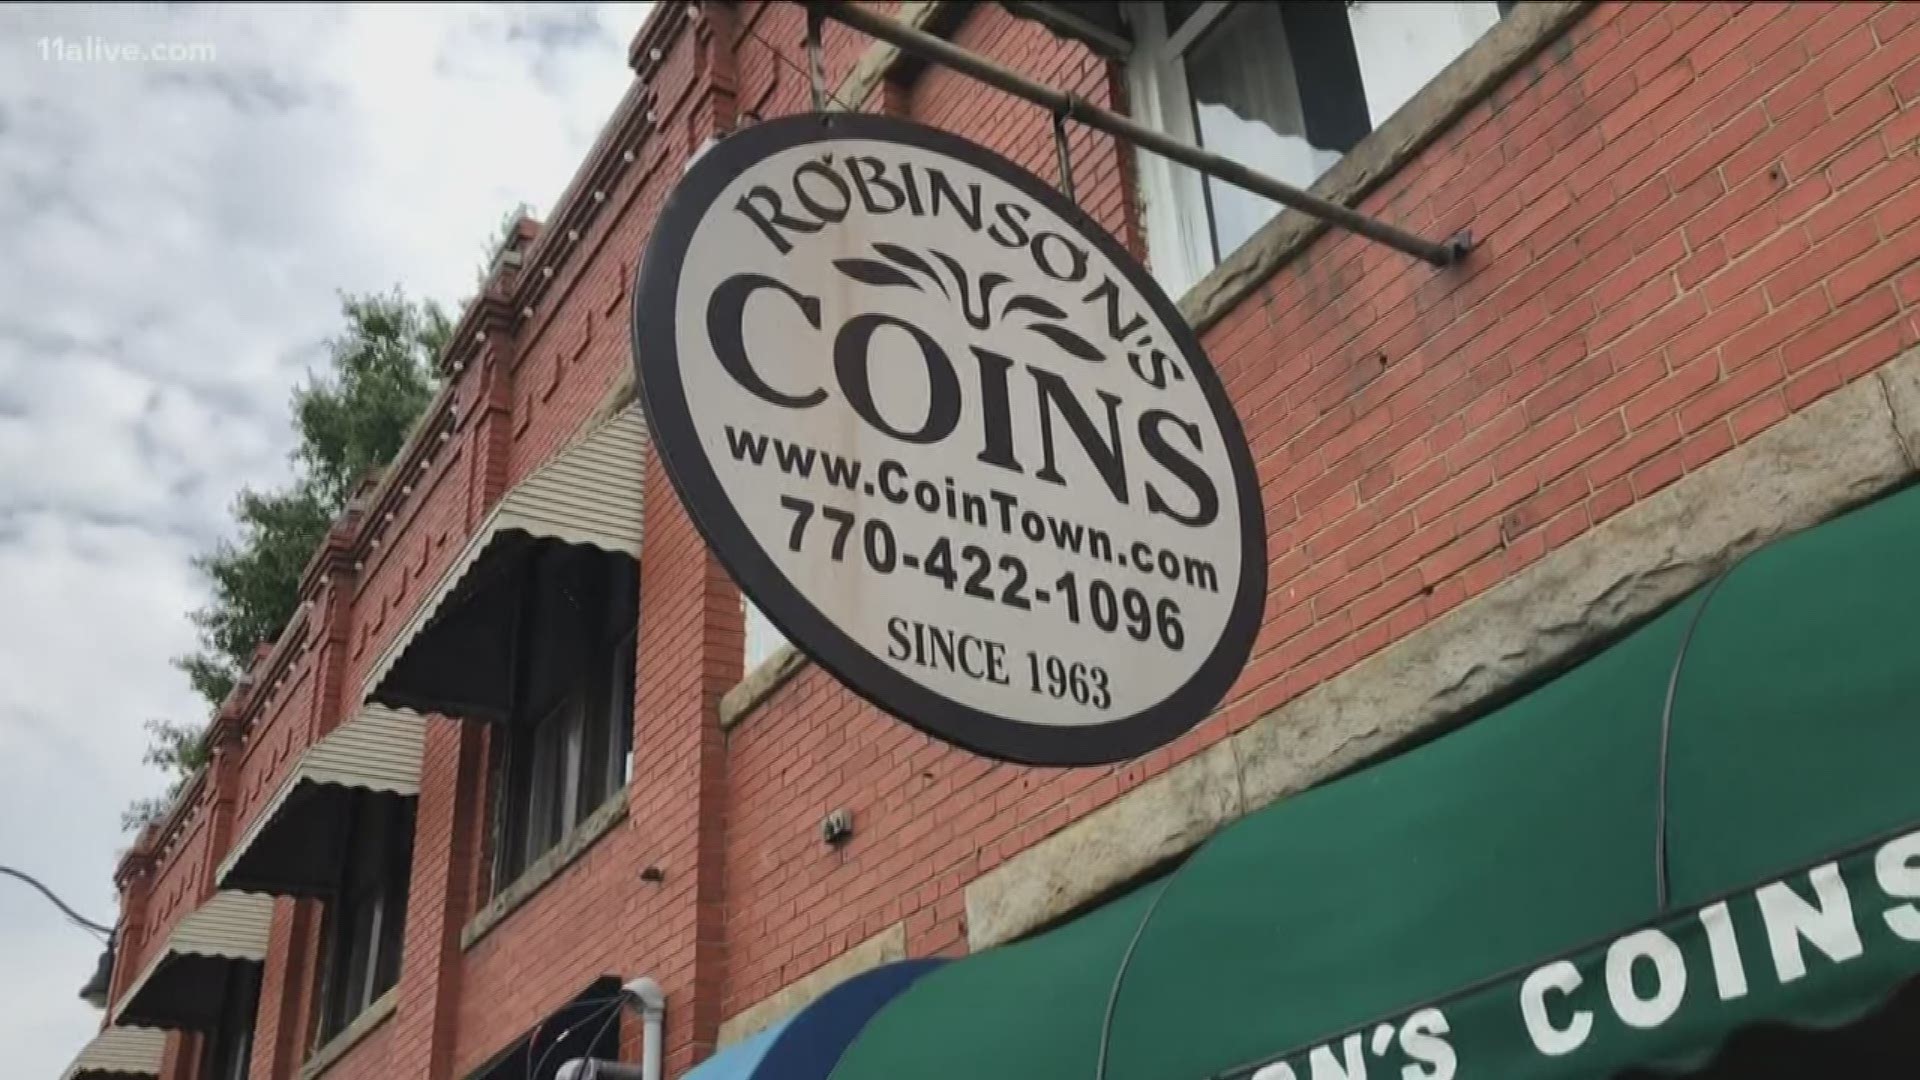 Benny and Sue Robinson got married in 1963. They opened their coin shop the same year. The marriage is still going strong, but they have decided to end their relationship with the Marietta Square coin shop.